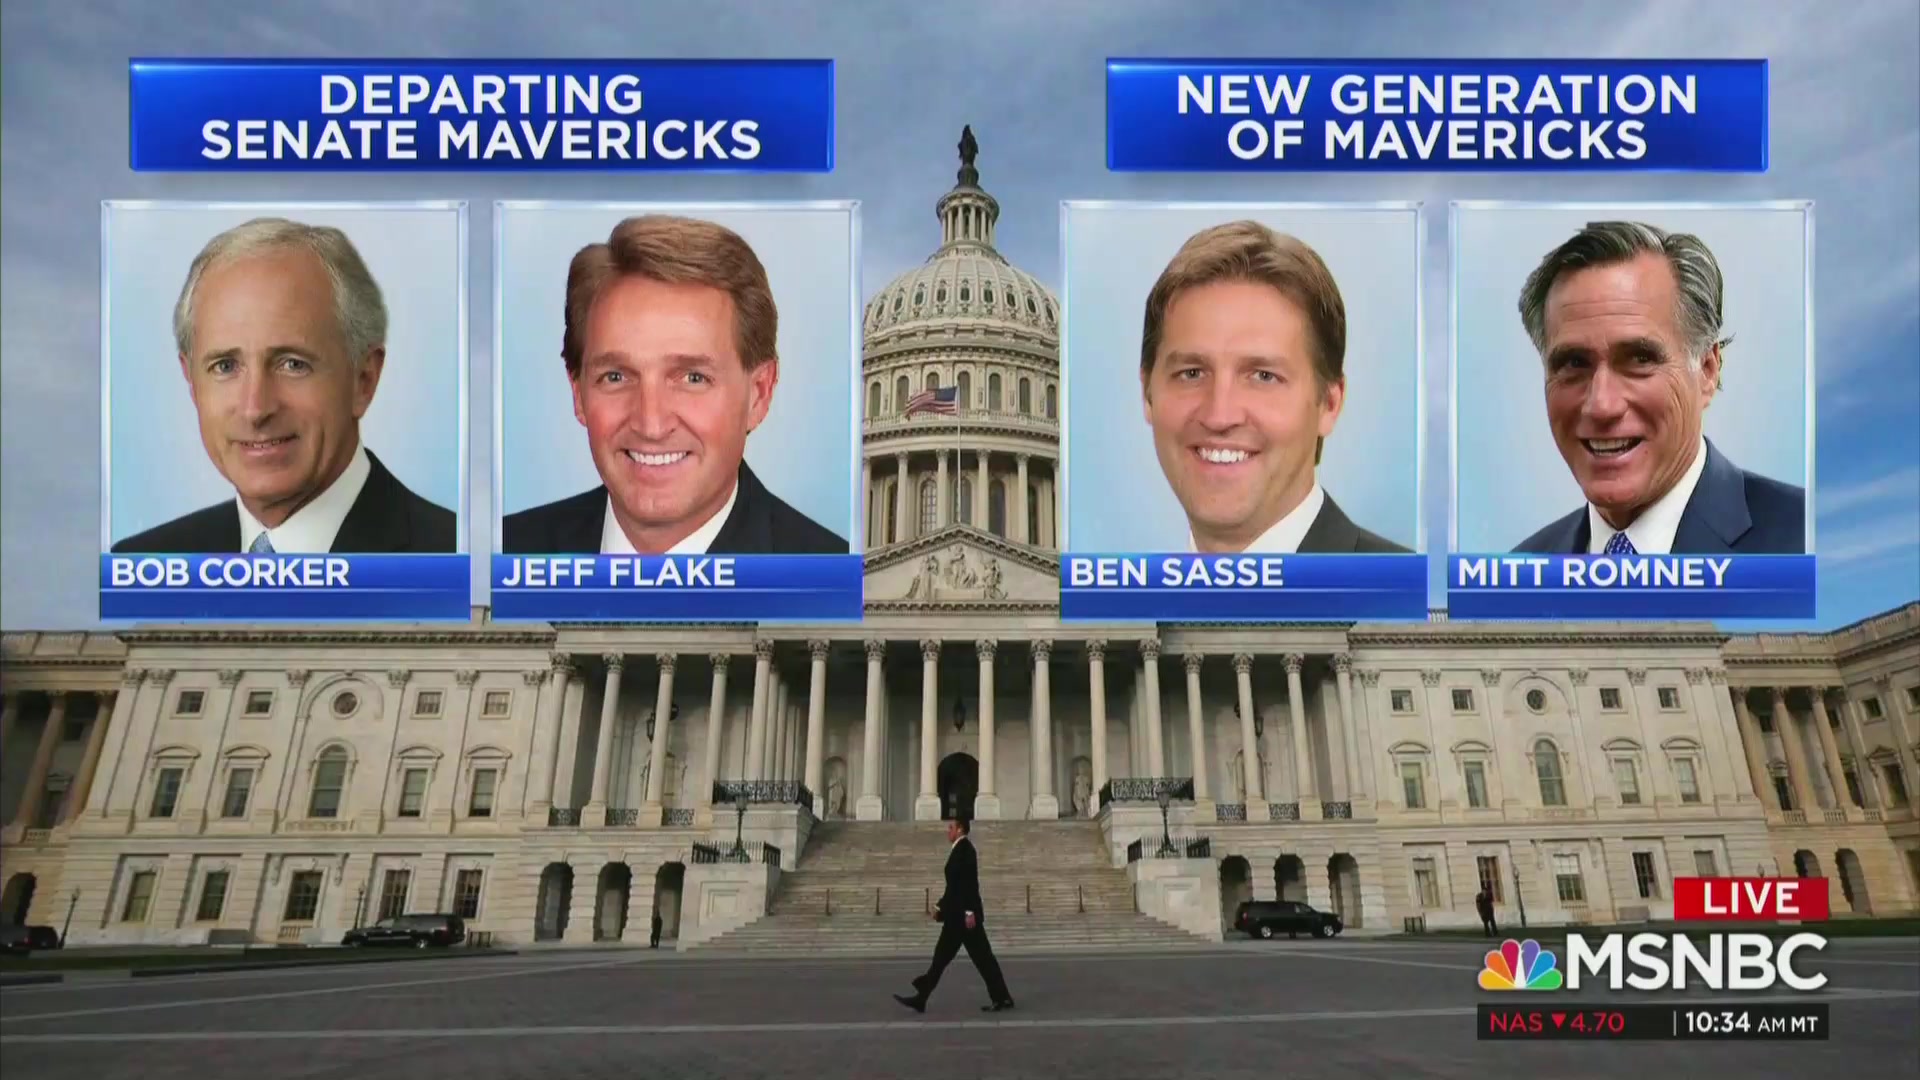 MSNBC Draws Fire For Describing Romney And Sasse As ‘New Generation Of Mavericks’